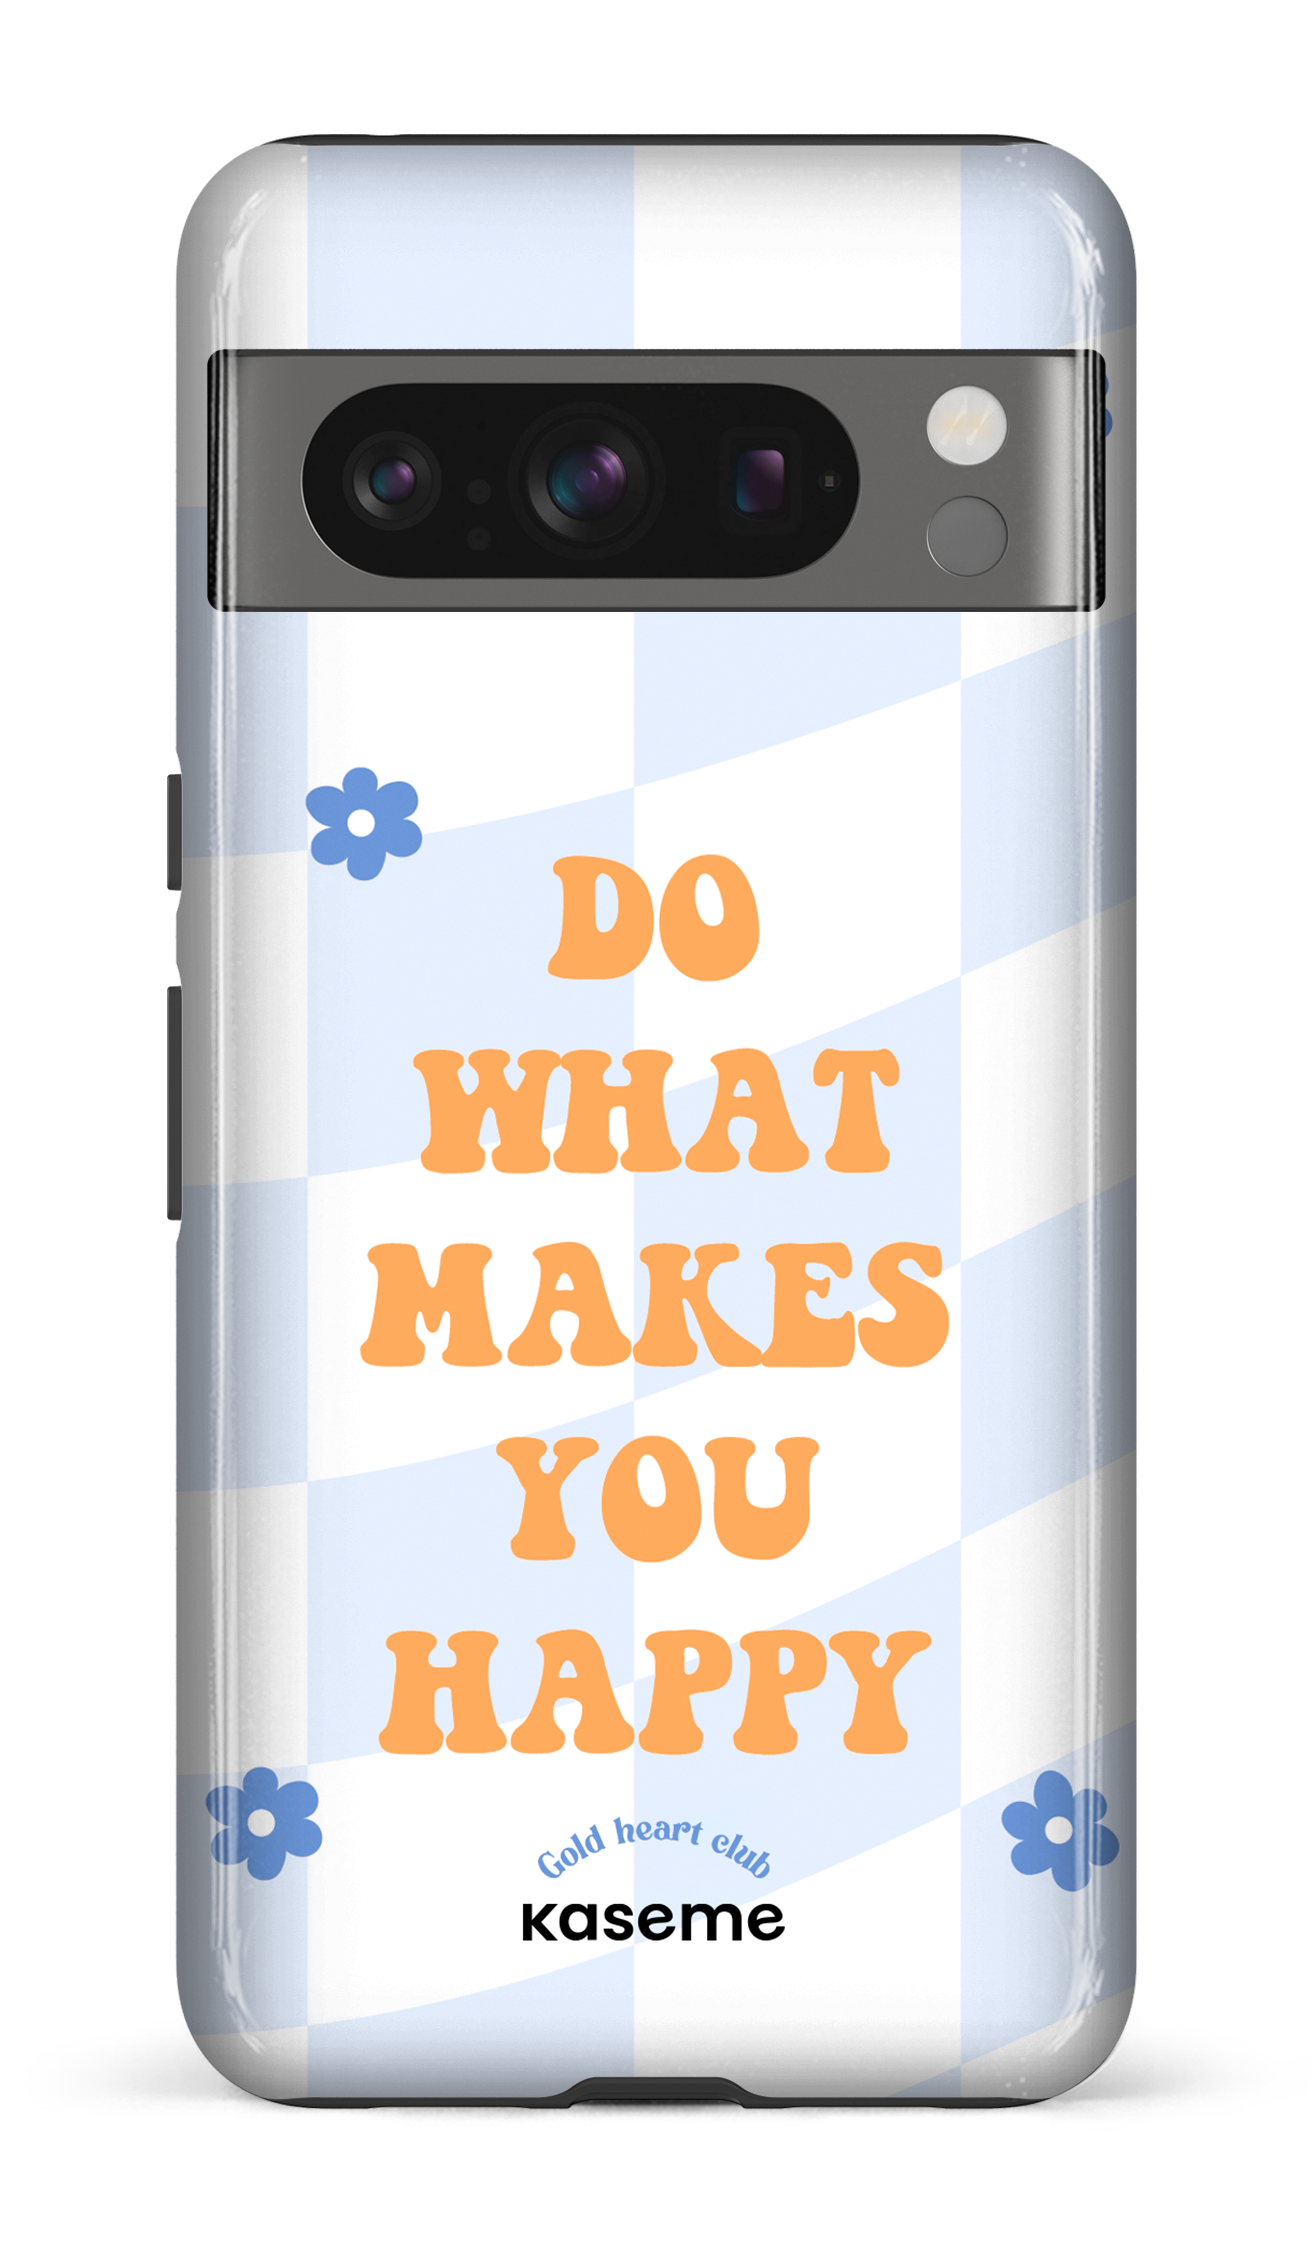 Do What Makes You Happy by Goldheartclub - Google Pixel 8 Pro